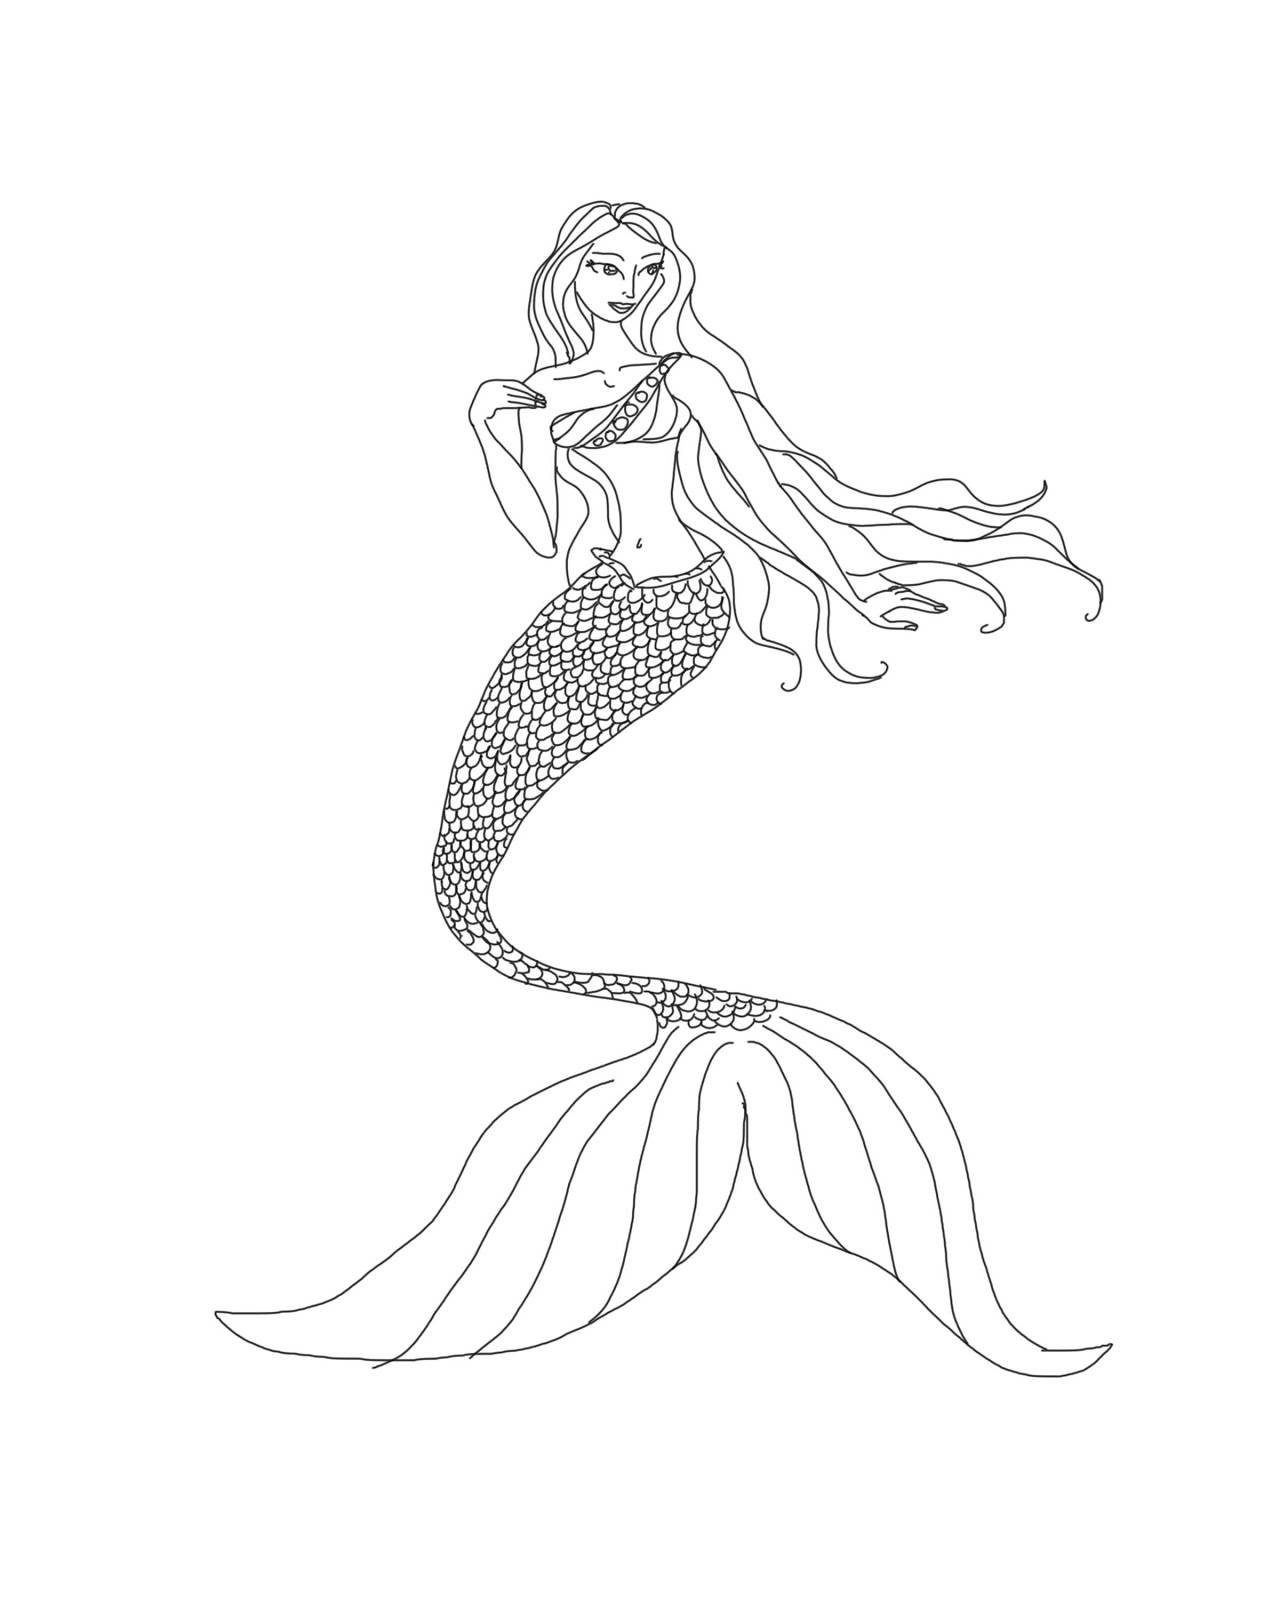 Mermaid 999 Coloring Pages Girls - free coloring pages of mermaids